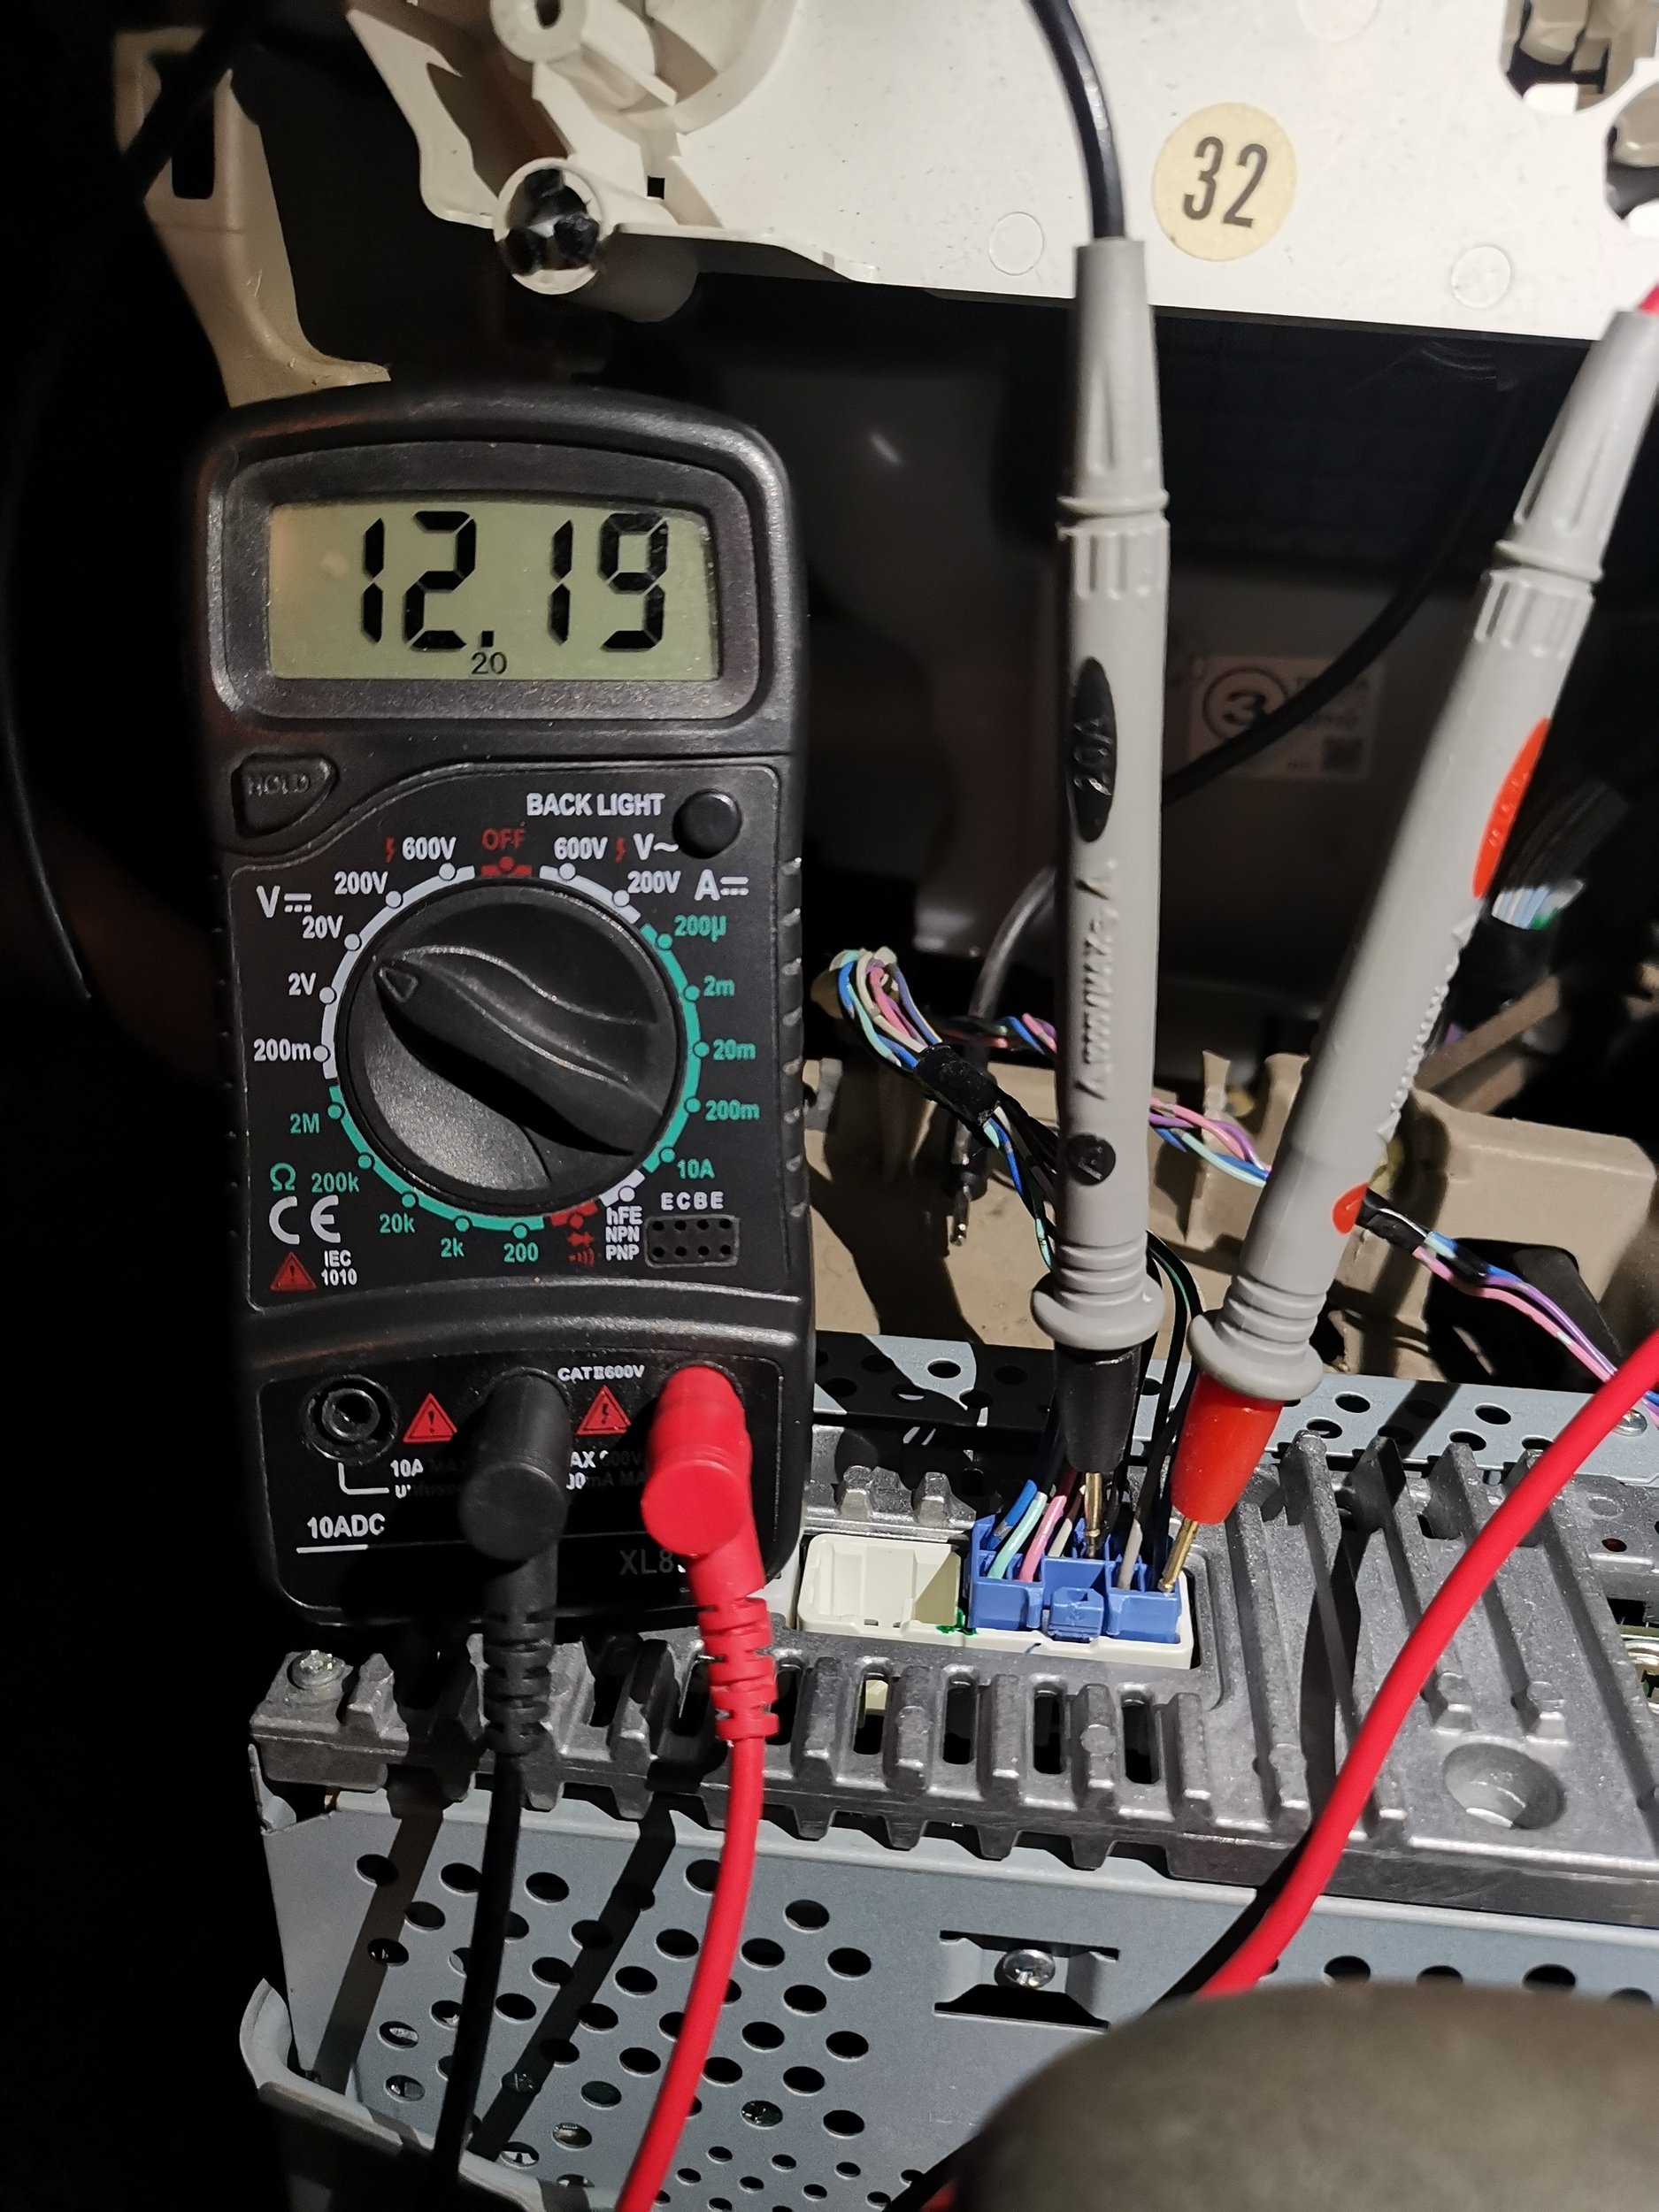 12v after ignition while connected to the original radio.jpg